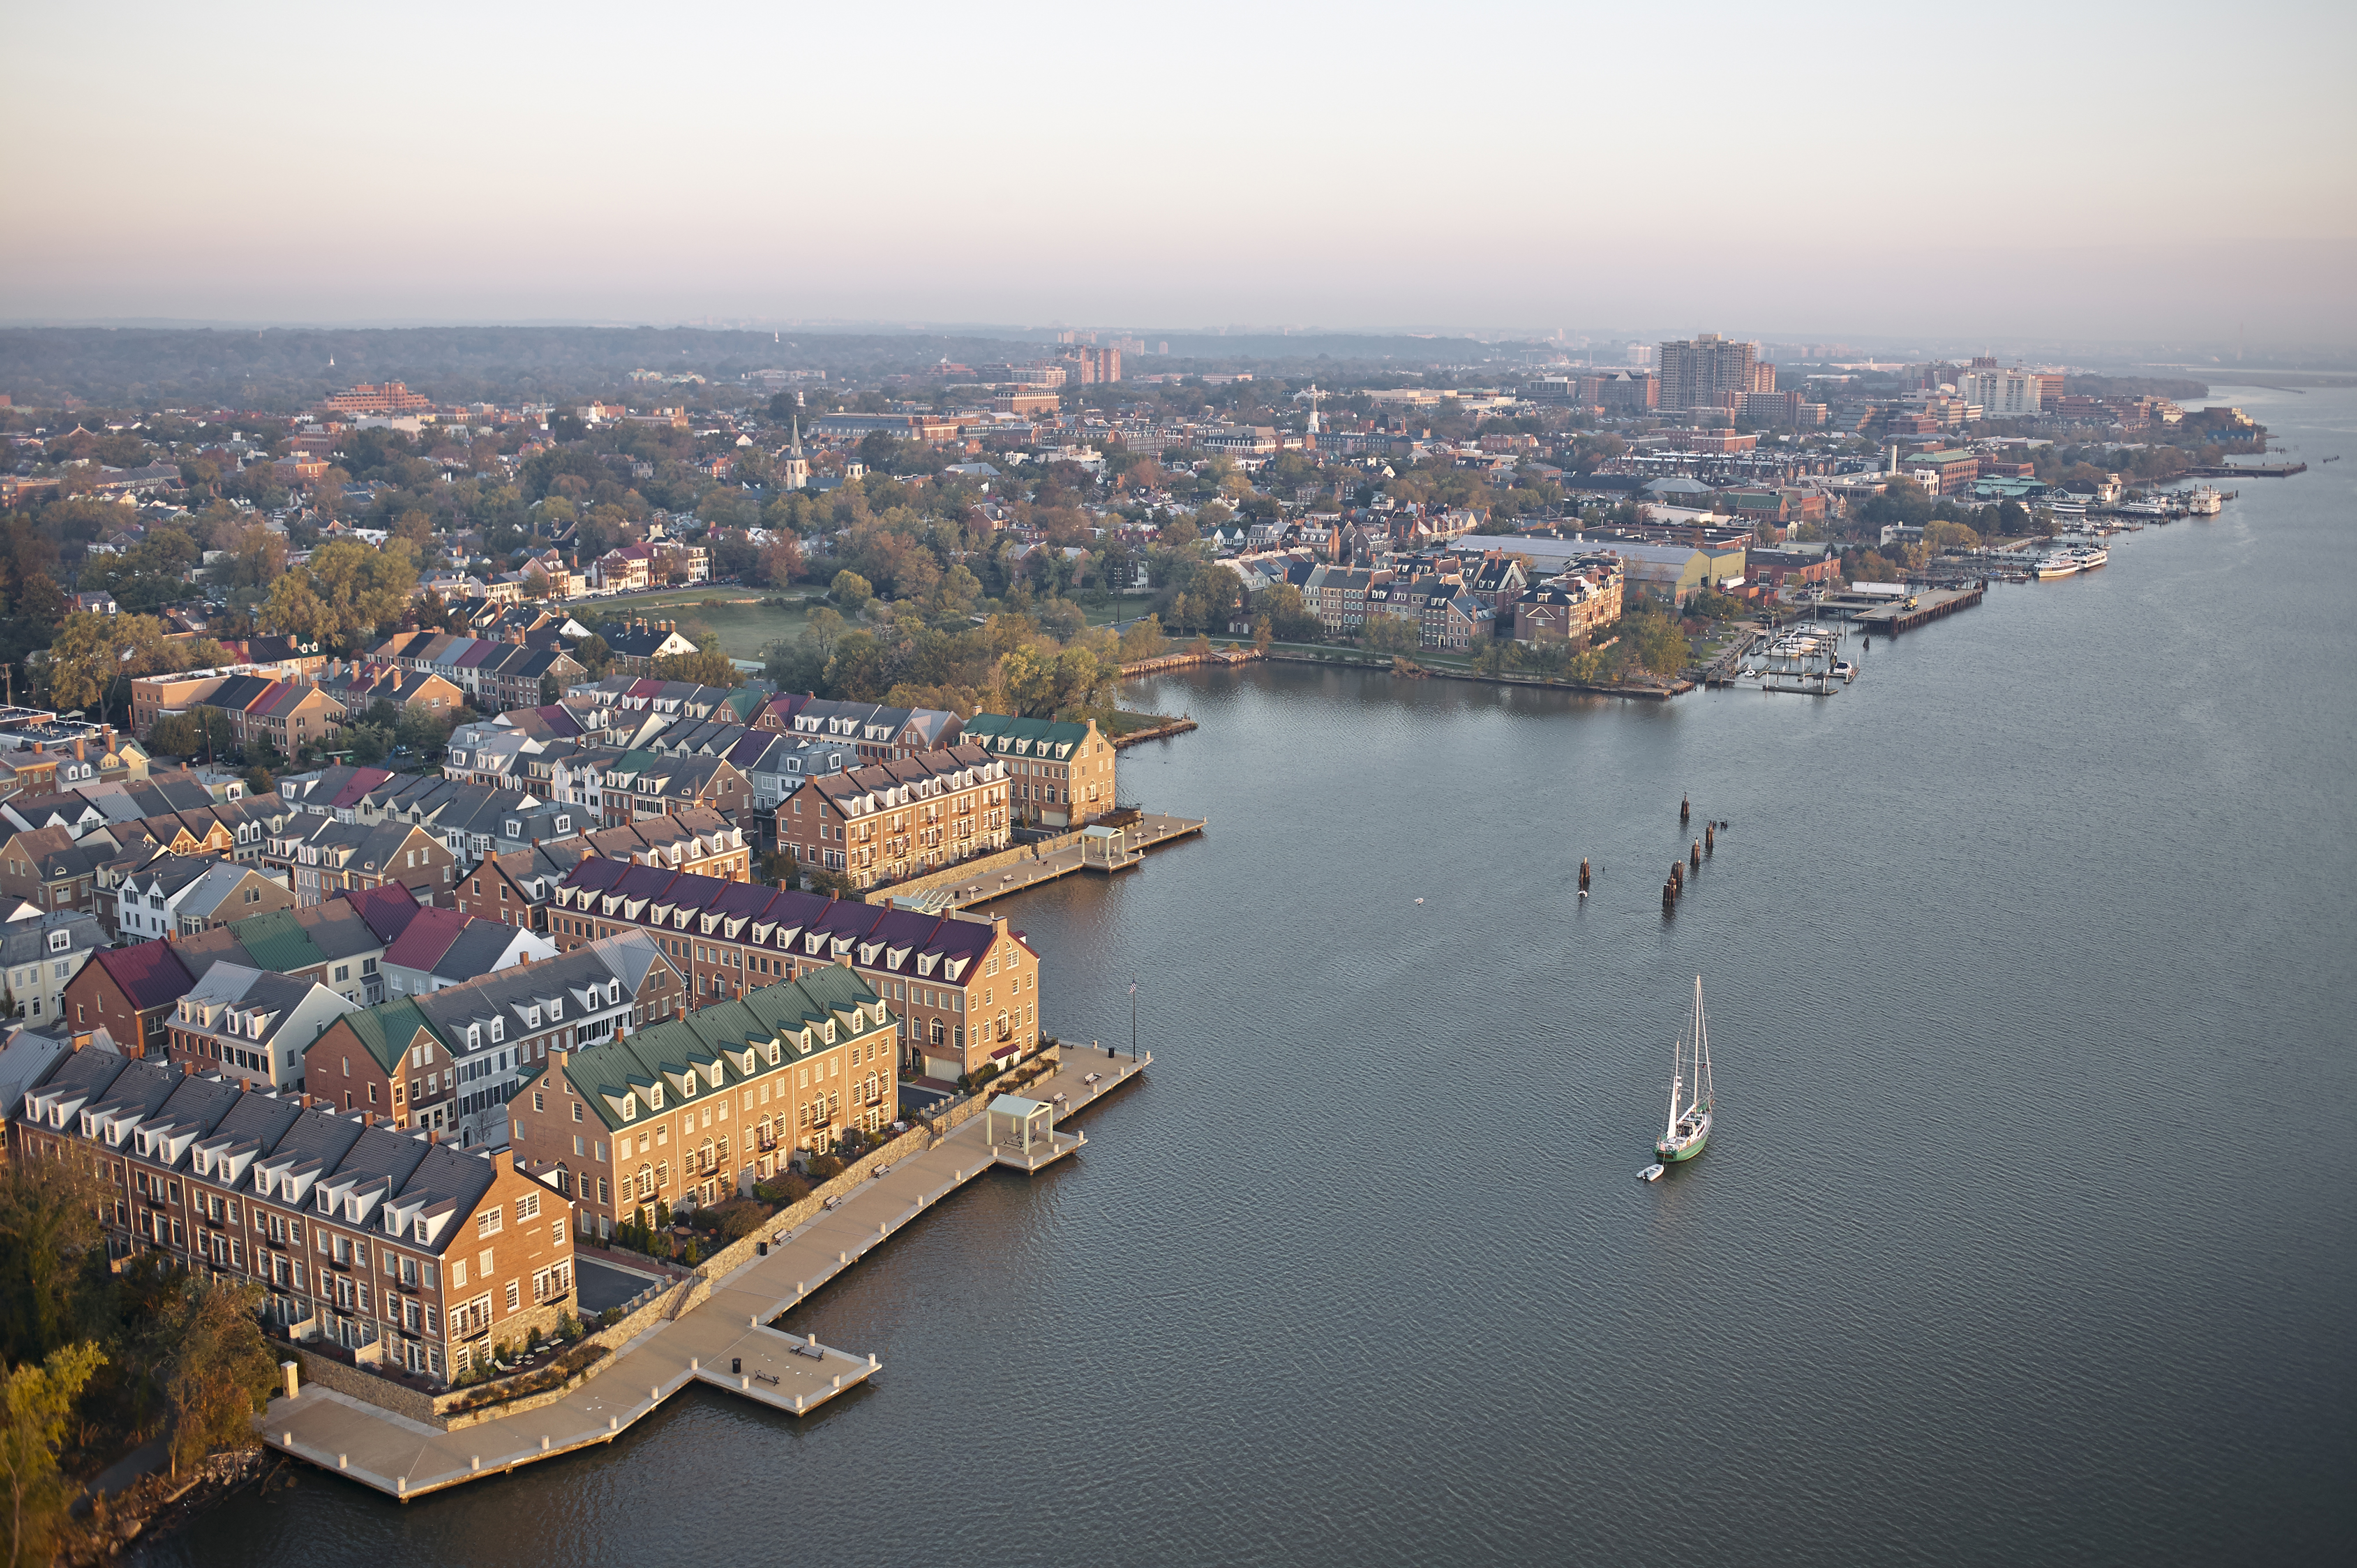 Aerial view of Old Town Alexandria from the Potomac River